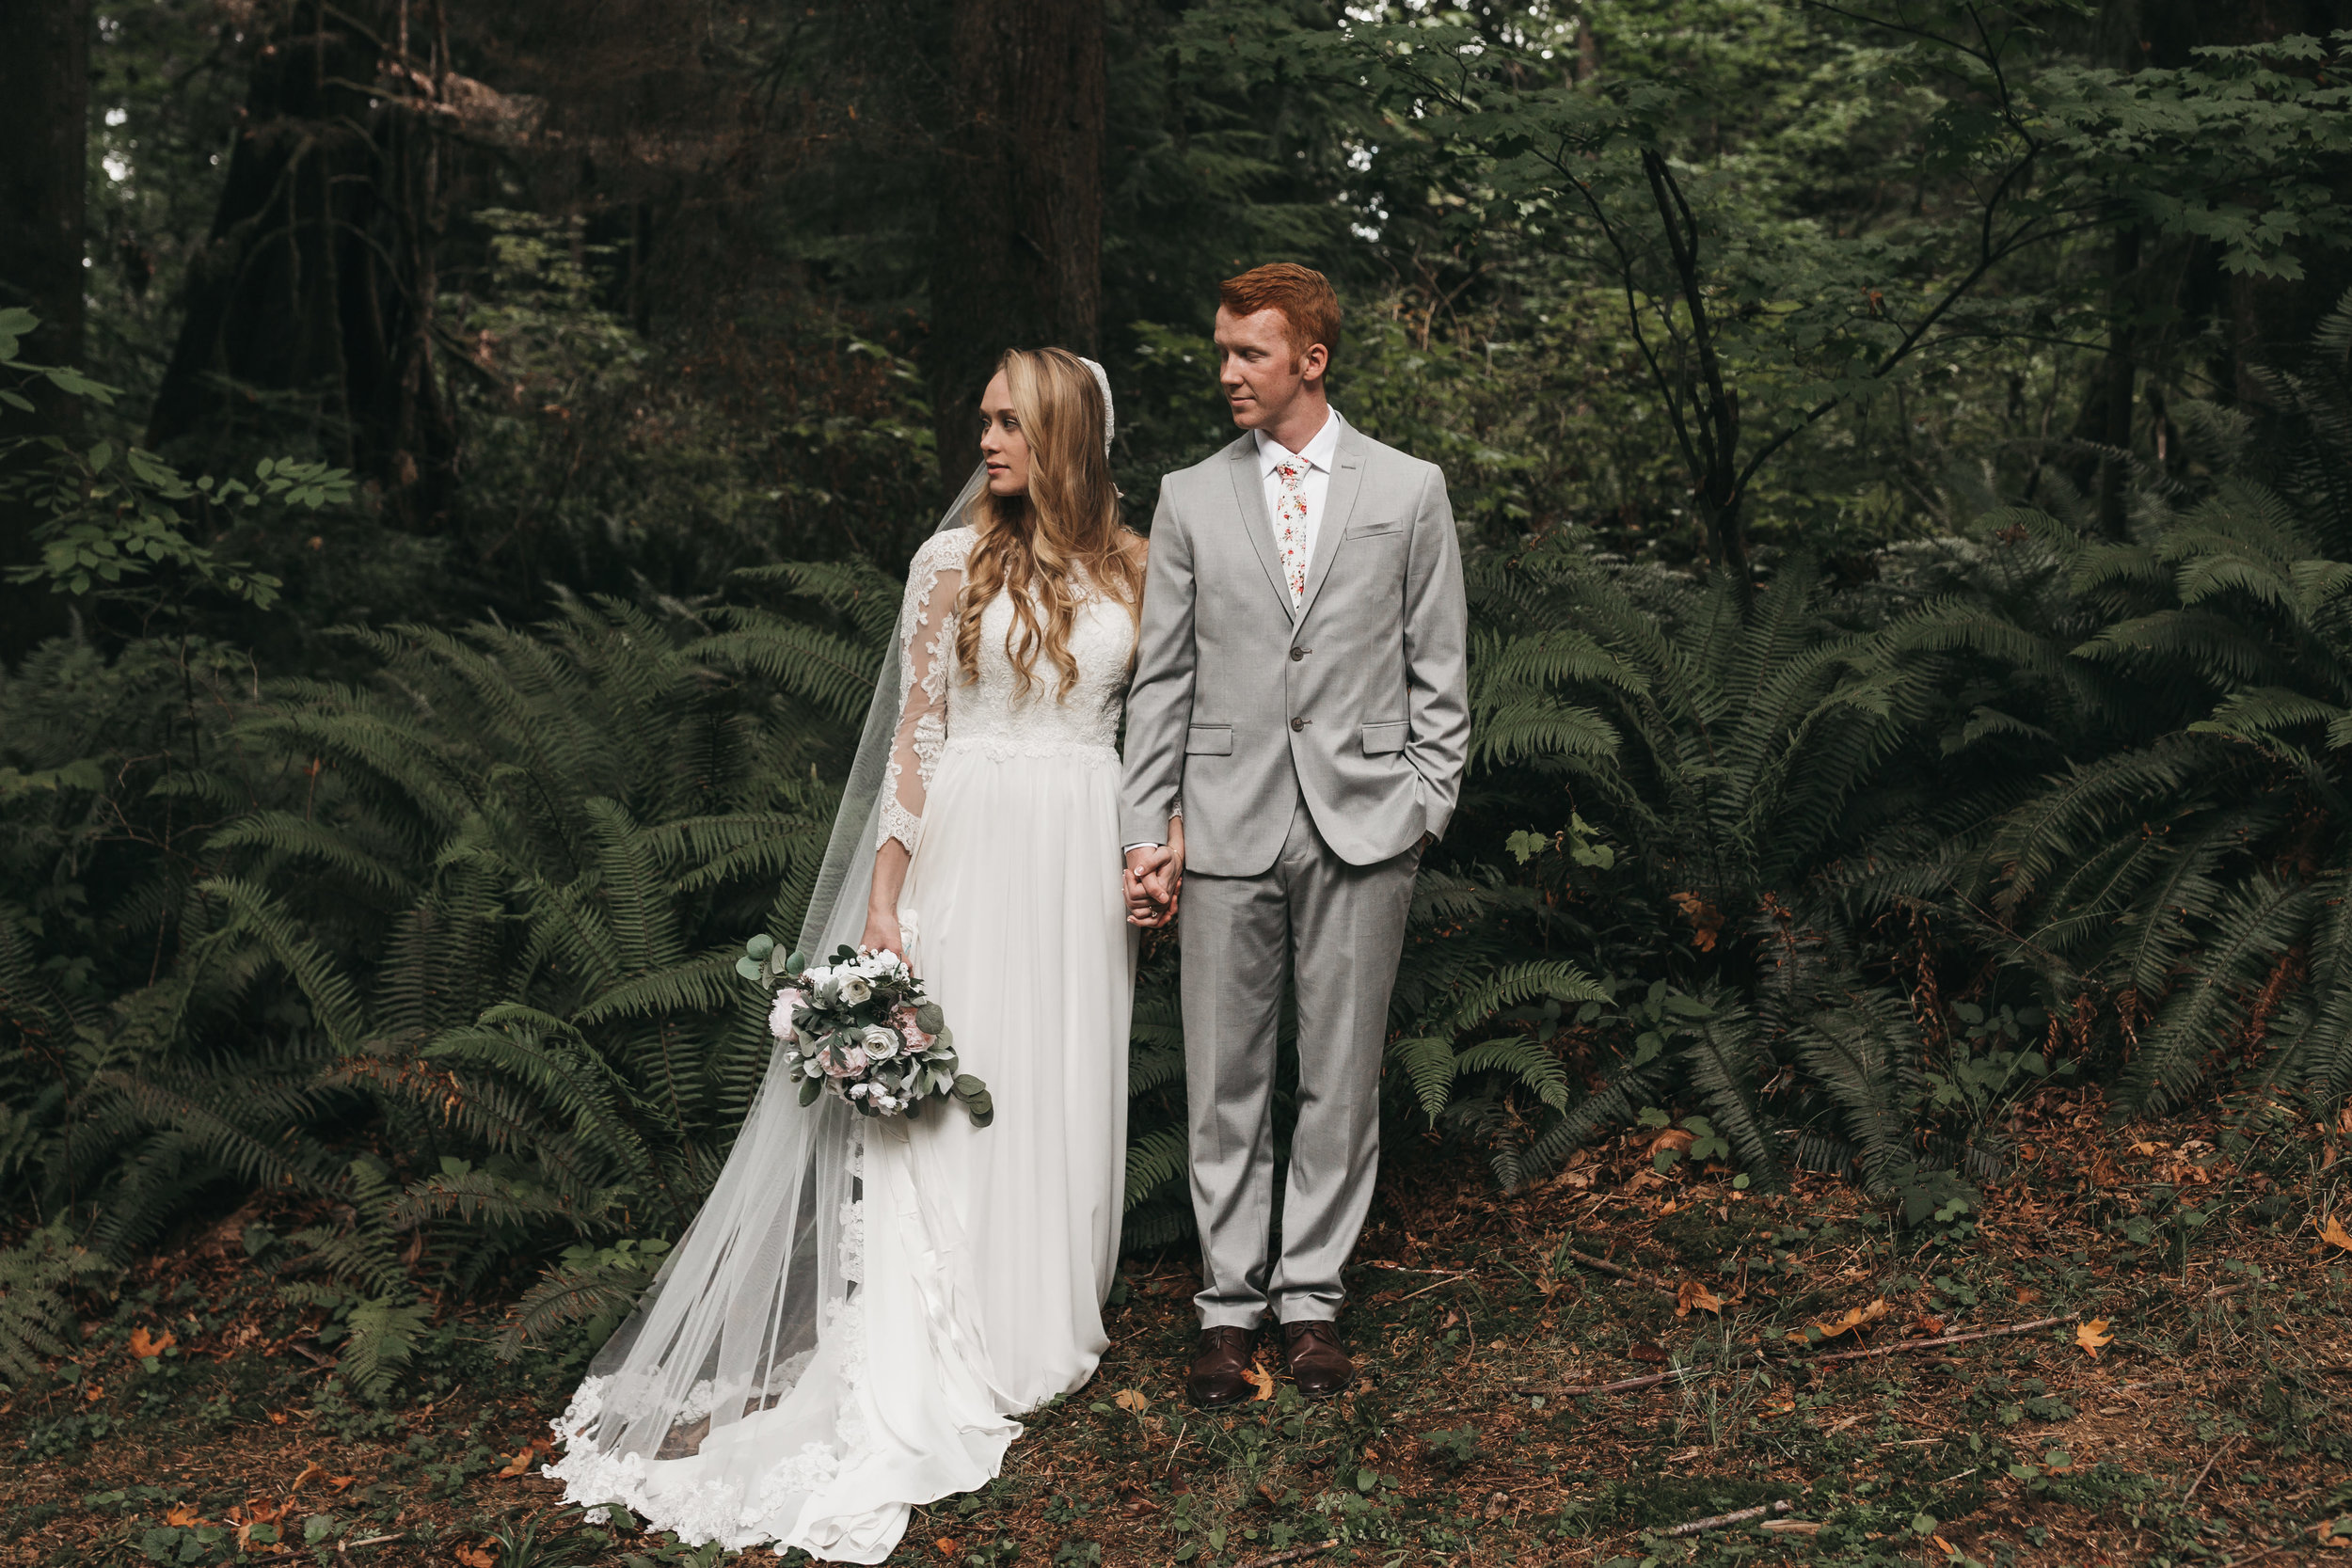 Adventure wedding and elopement photography. Intimate Lookout Lodge Wedding. Between the Pine- Seattle, WA